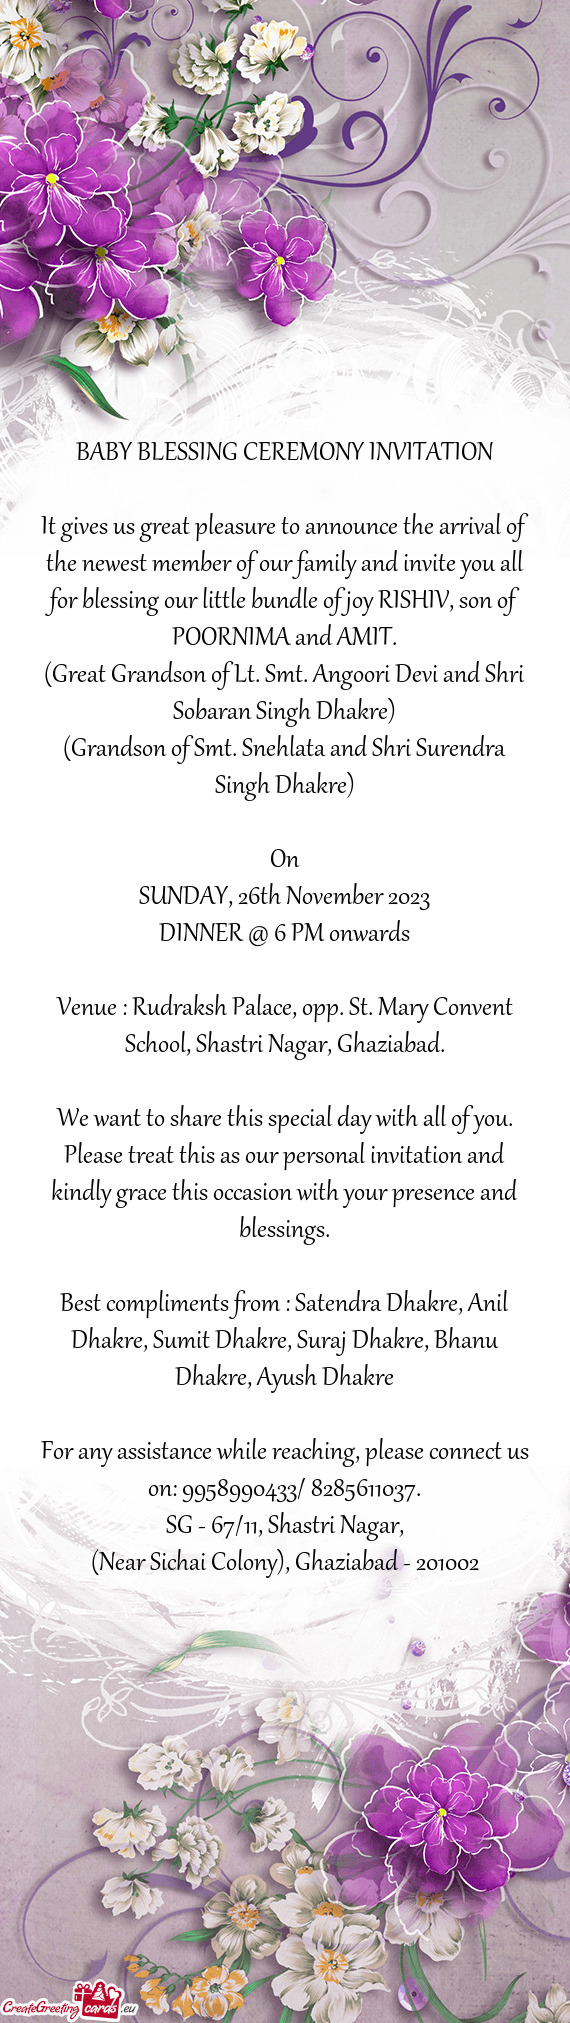 We want to share this special day with all of you. Please treat this as our personal invitation and